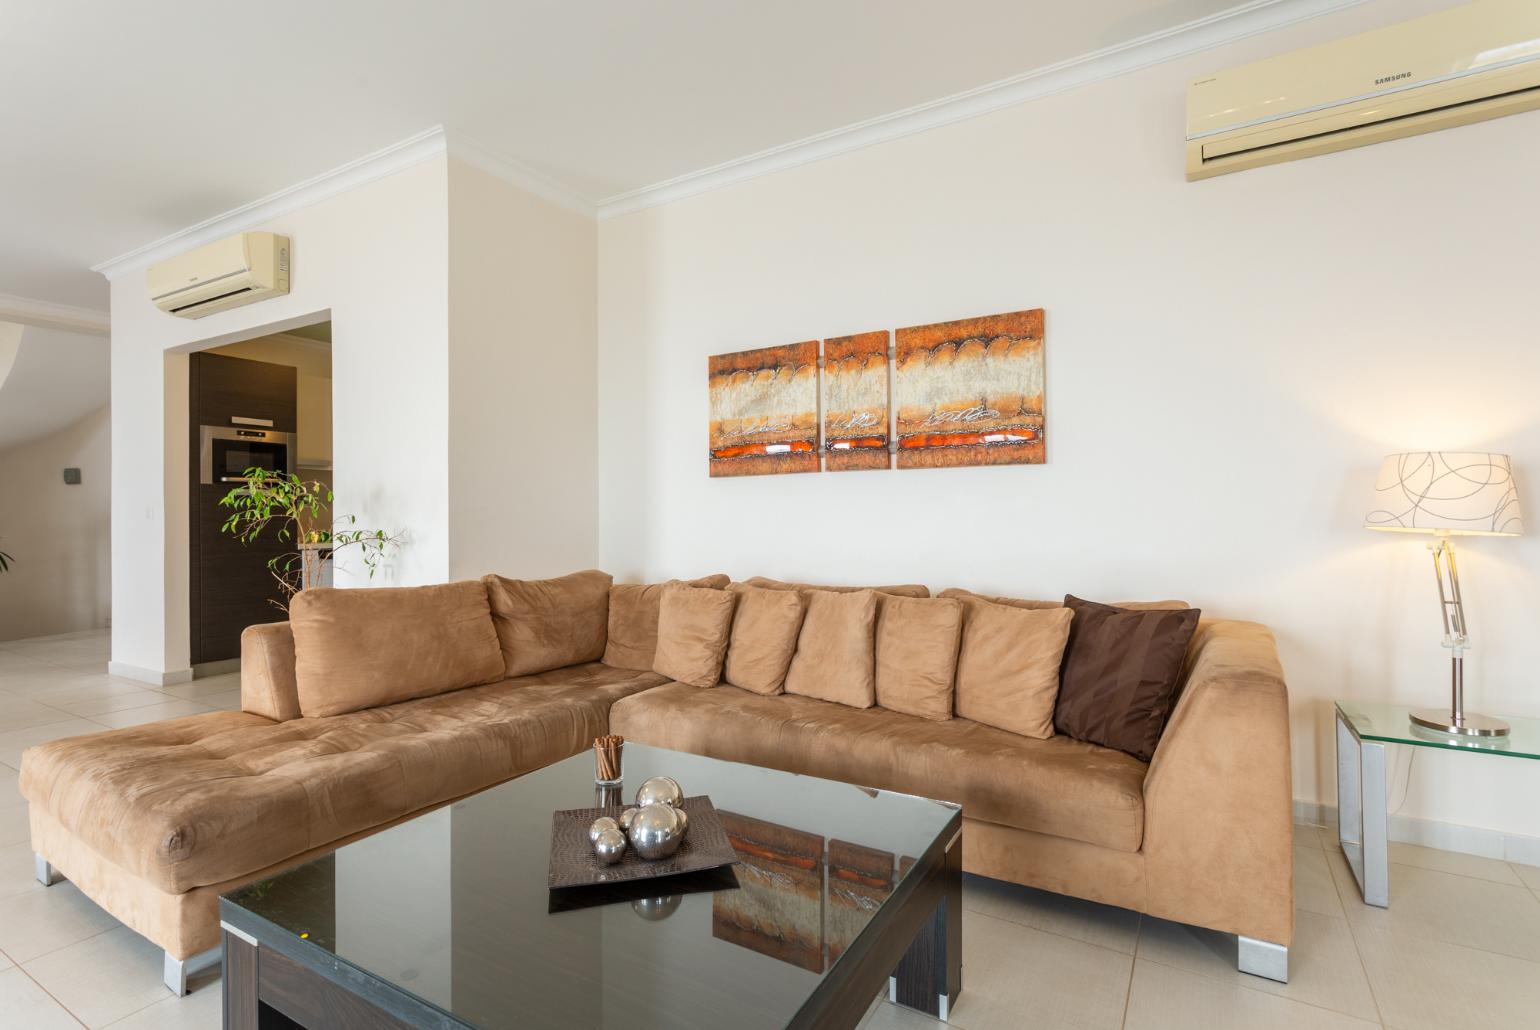 Open-plan living room with sofas, dining area, kitchen, ornamental fireplace, A/C, WiFi internet, satellite TV, and terrace access with sea views